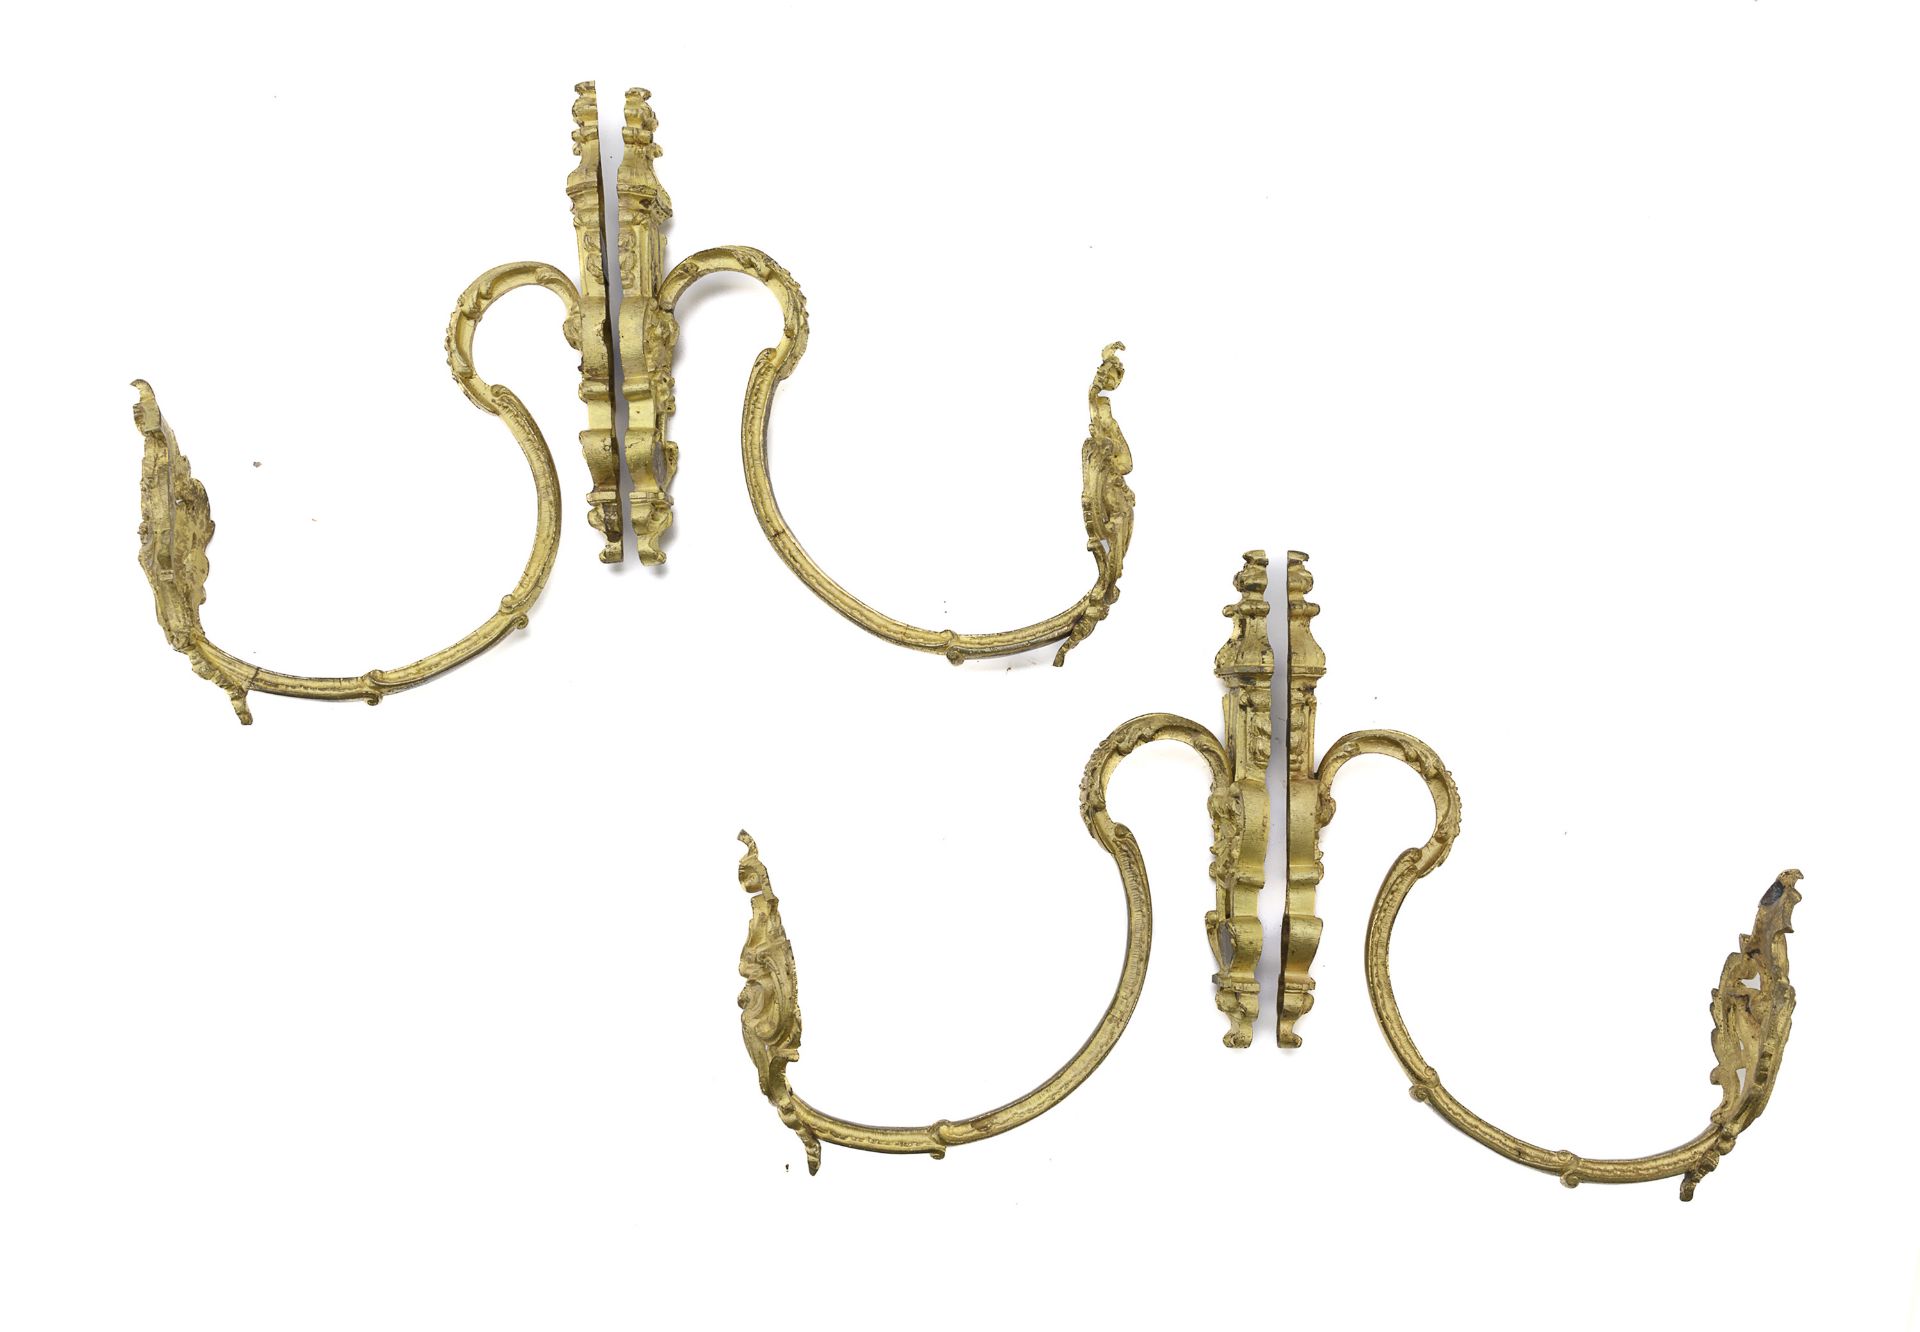 TWO PAIRS OF CURTAIN RODS END OF THE 18TH CENTURY